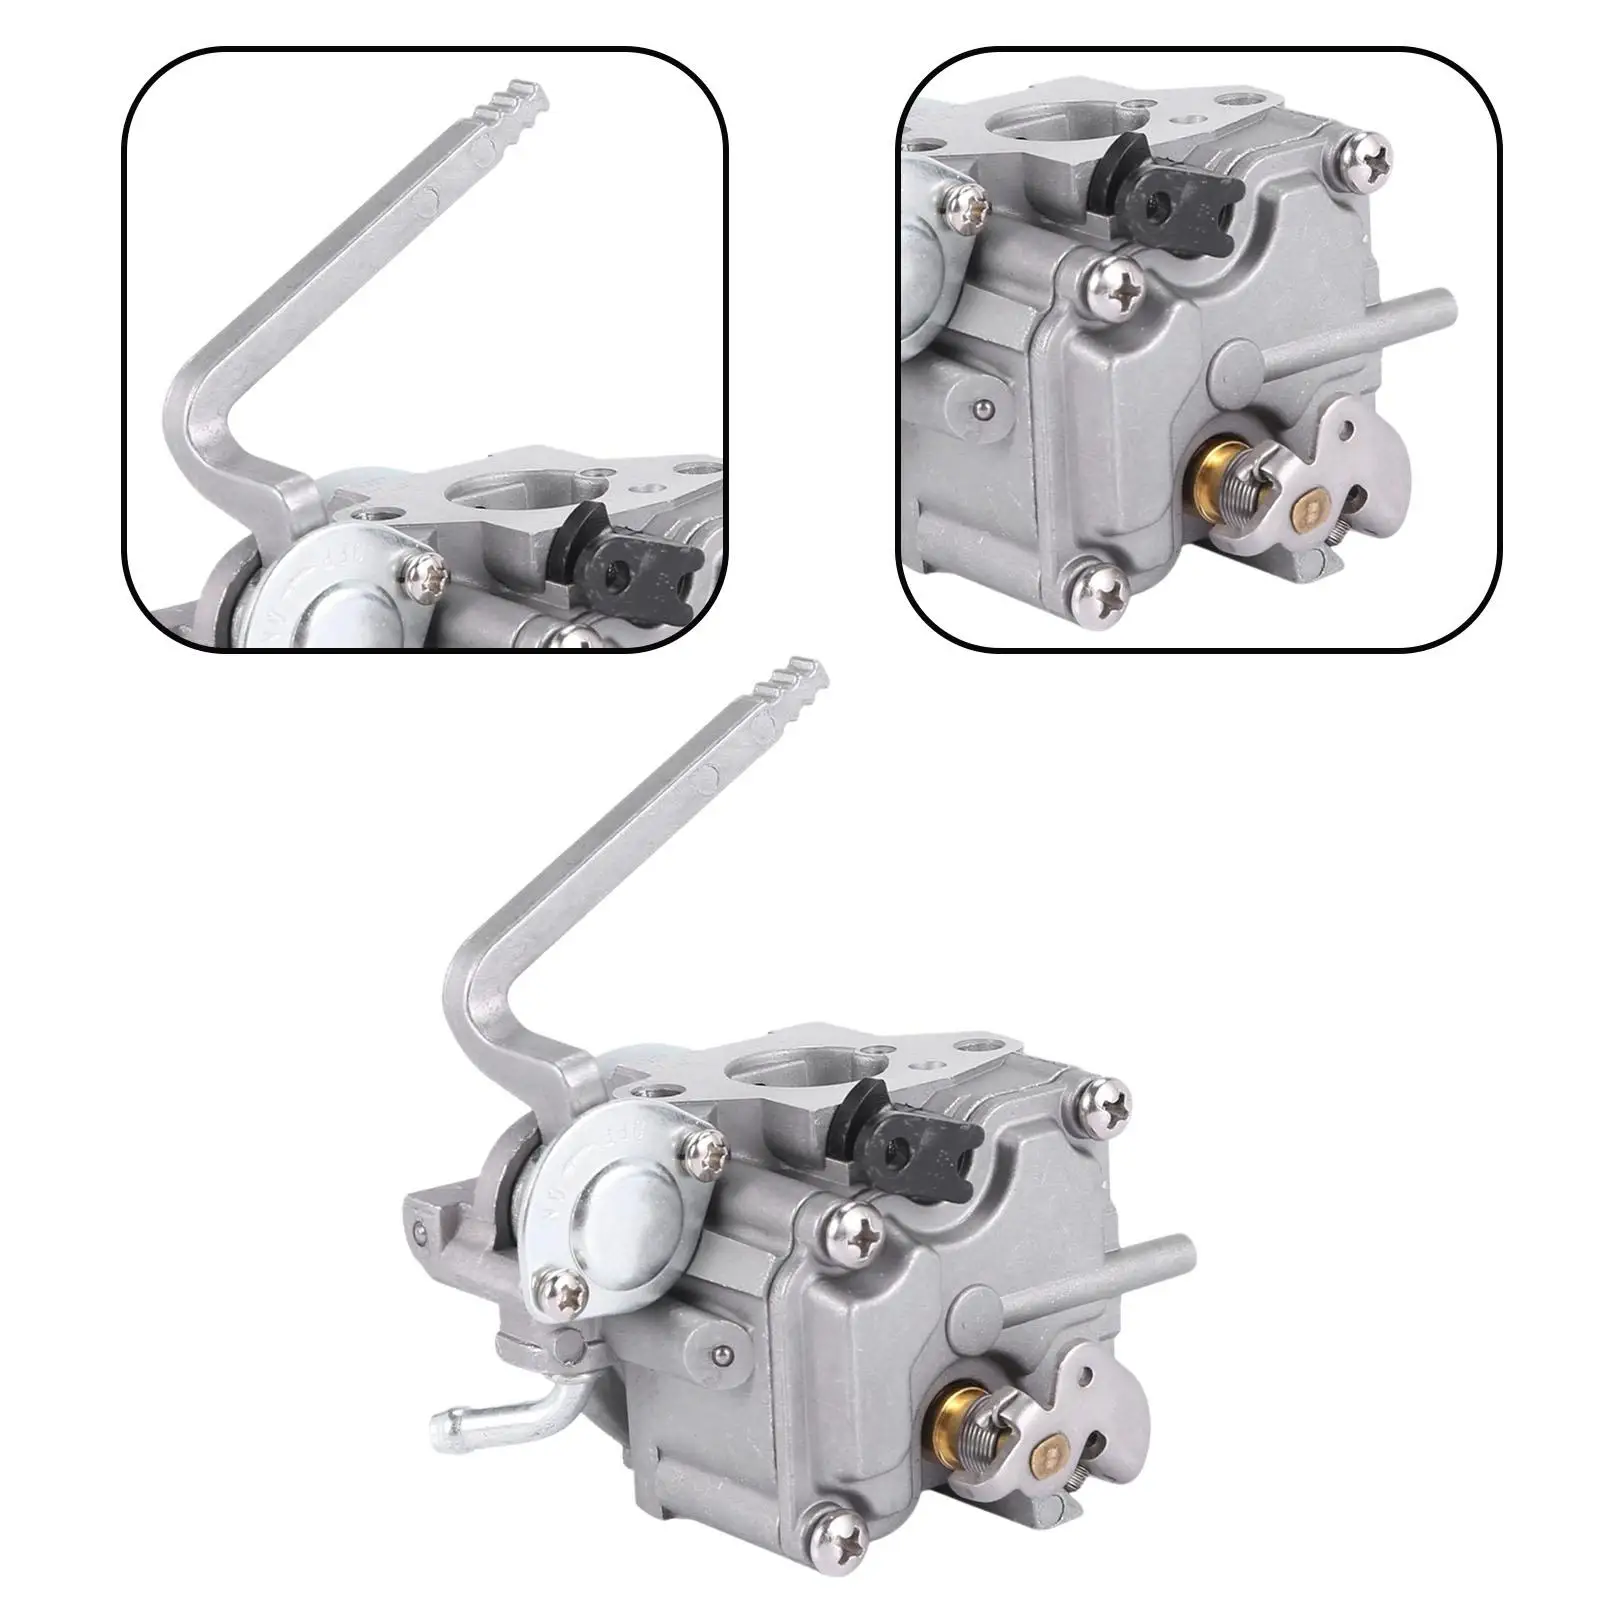 Carburetor 16100-zw6-716 Professional Replacement Outboard Engines Parts Boat Accessory for Honda BF33B E BF2D2 BF2D4 BF2D5